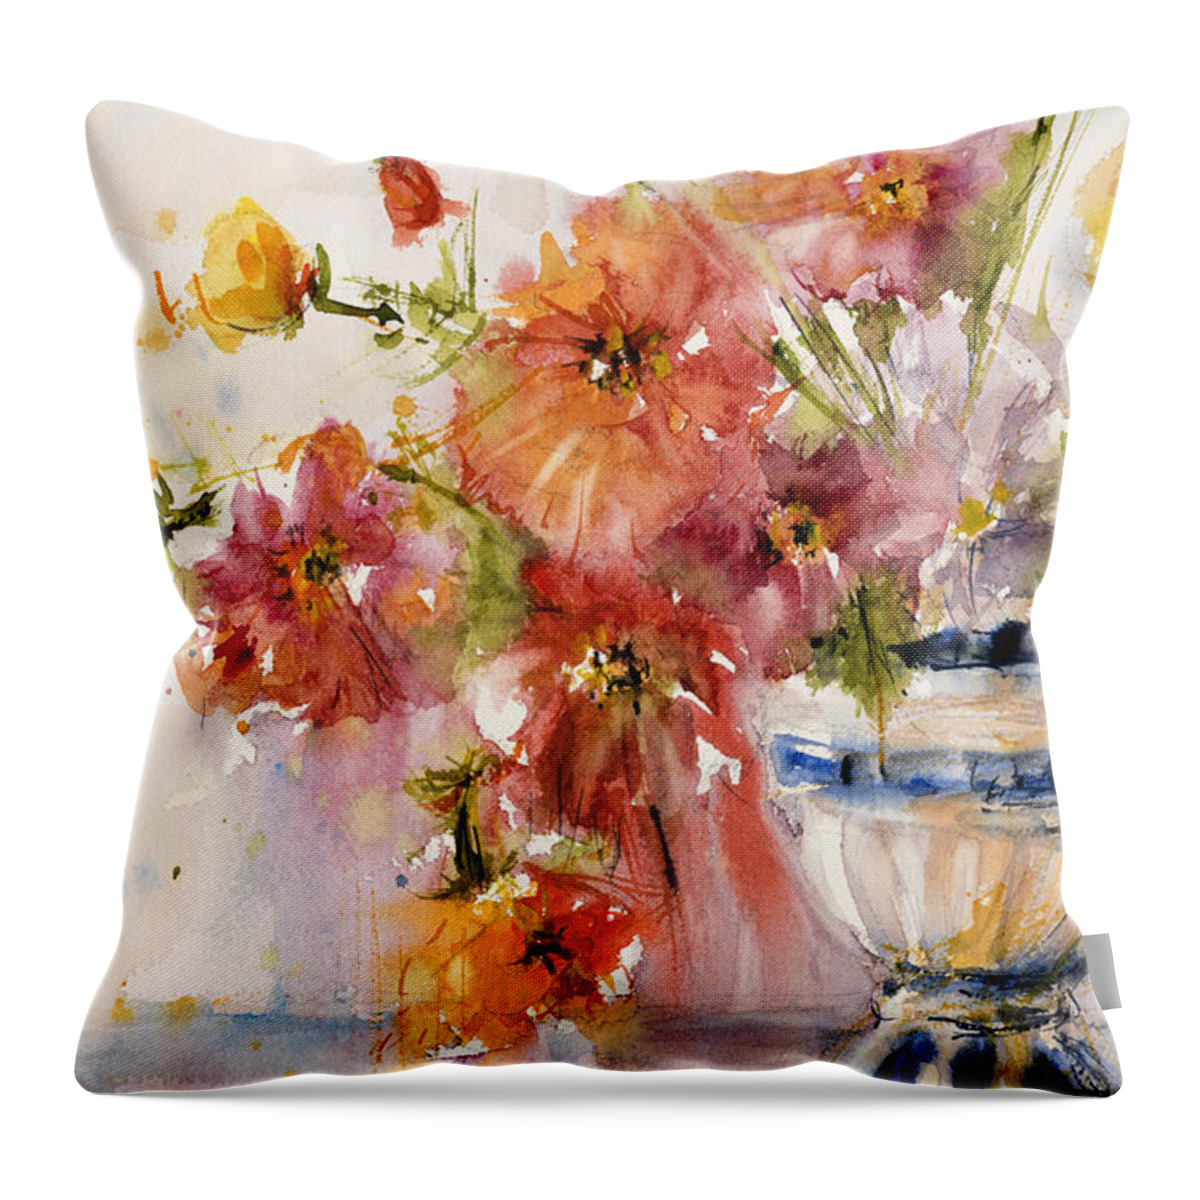 Flower Throw Pillow featuring the painting Poppies by Judith Levins